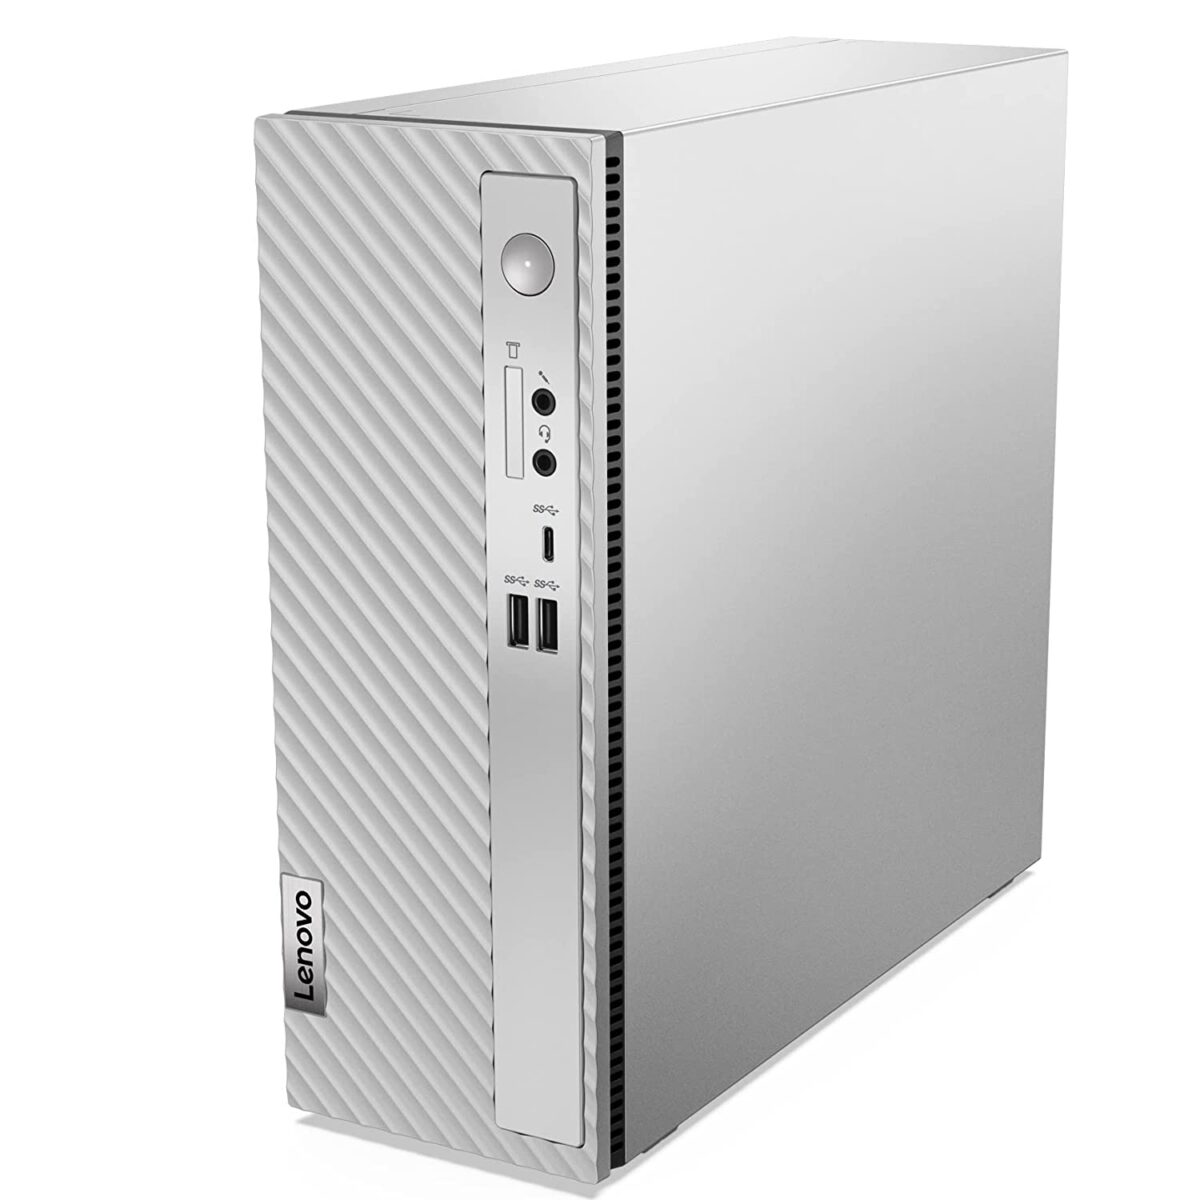 Lenovo IdeaCentre 3 Desktop 90VT0001IN with 13th Gen Intel processor launched in India